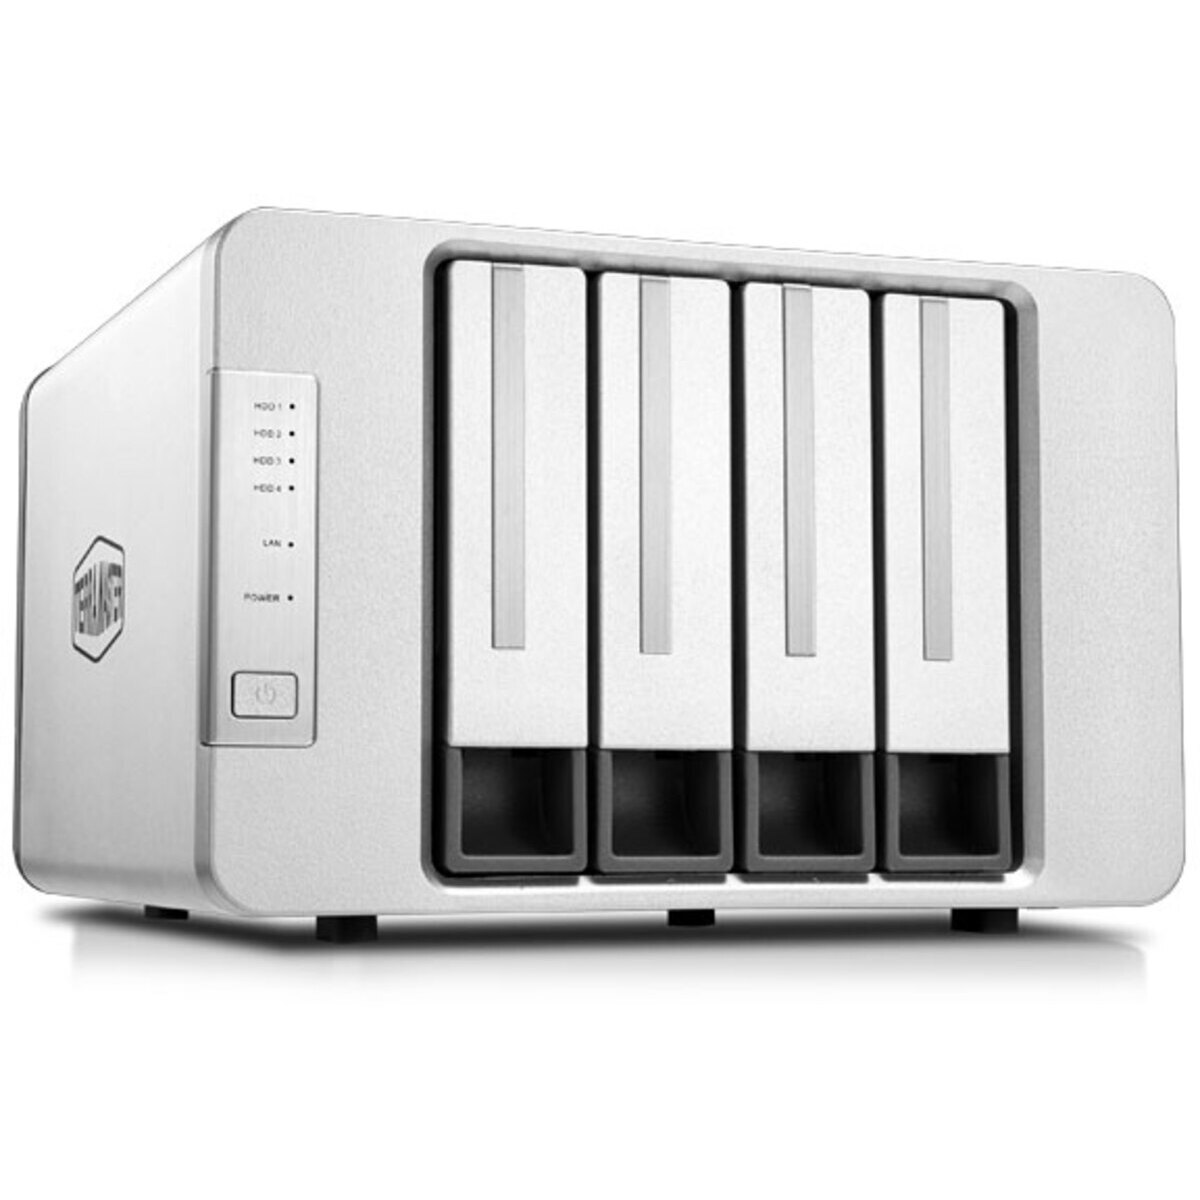 TerraMaster F4-223 20tb 4-Bay Desktop Personal / Basic Home / Small Office NAS - Network Attached Storage Device 2x10tb Western Digital Gold WD102KRYZ 3.5 7200rpm SATA 6Gb/s HDD ENTERPRISE Class Drives Installed - Burn-In Tested - FREE RAM UPGRADE F4-223